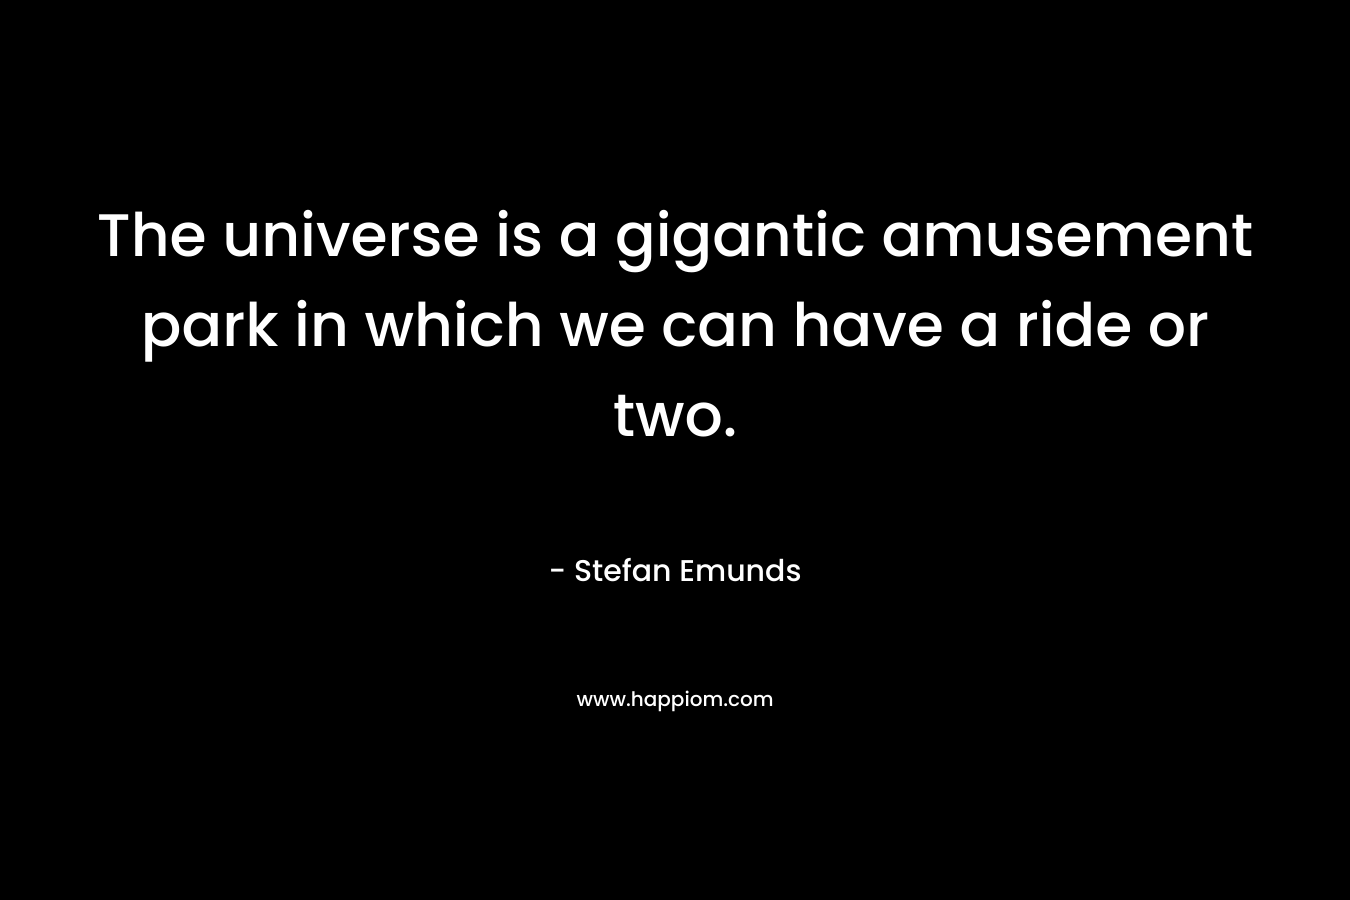 The universe is a gigantic amusement park in which we can have a ride or two.